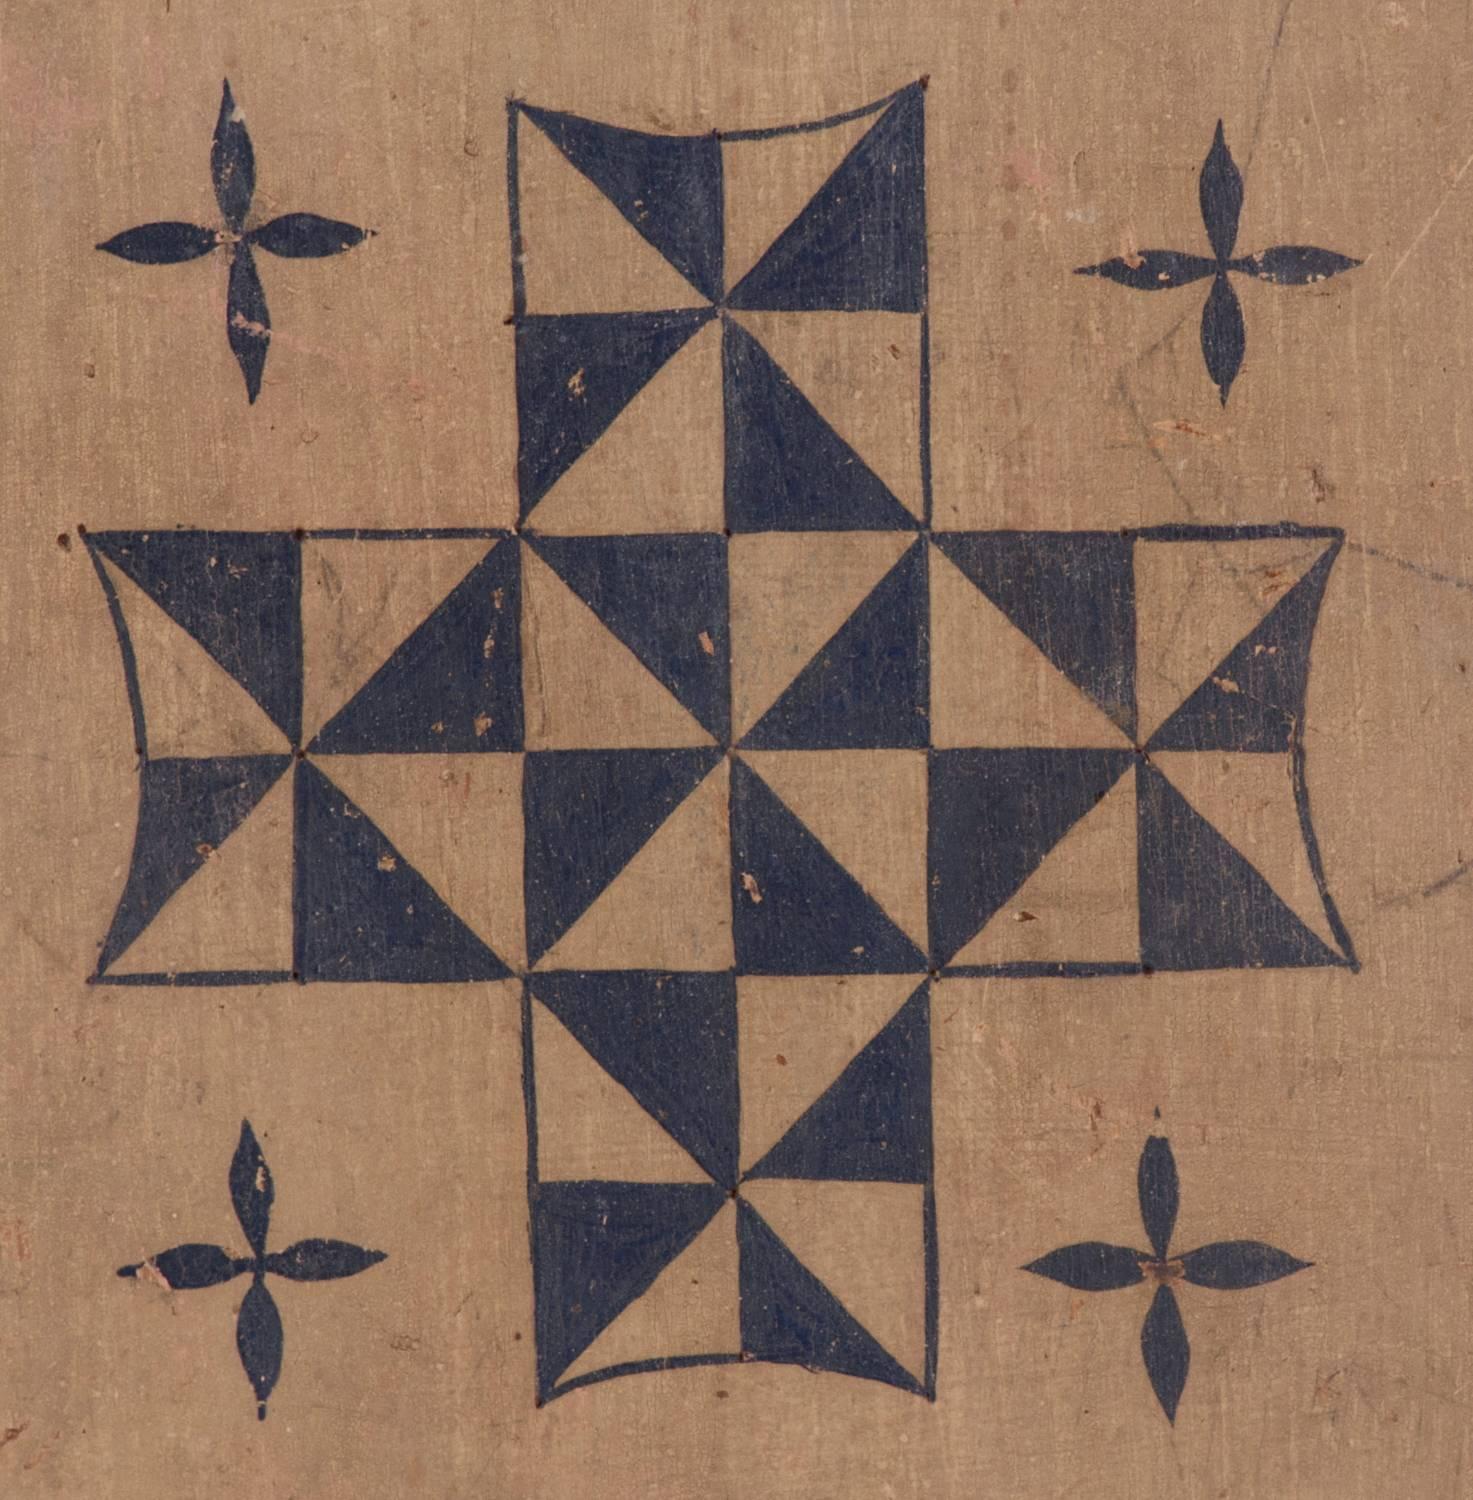 Masterpiece quality combination fox and geese and mill game board, in original and untouched red, ochre white and blue paint, with pinwheel quilt pattern design in the centre and a winding vine border, circa 1820-1845, with checkers on the reverse,